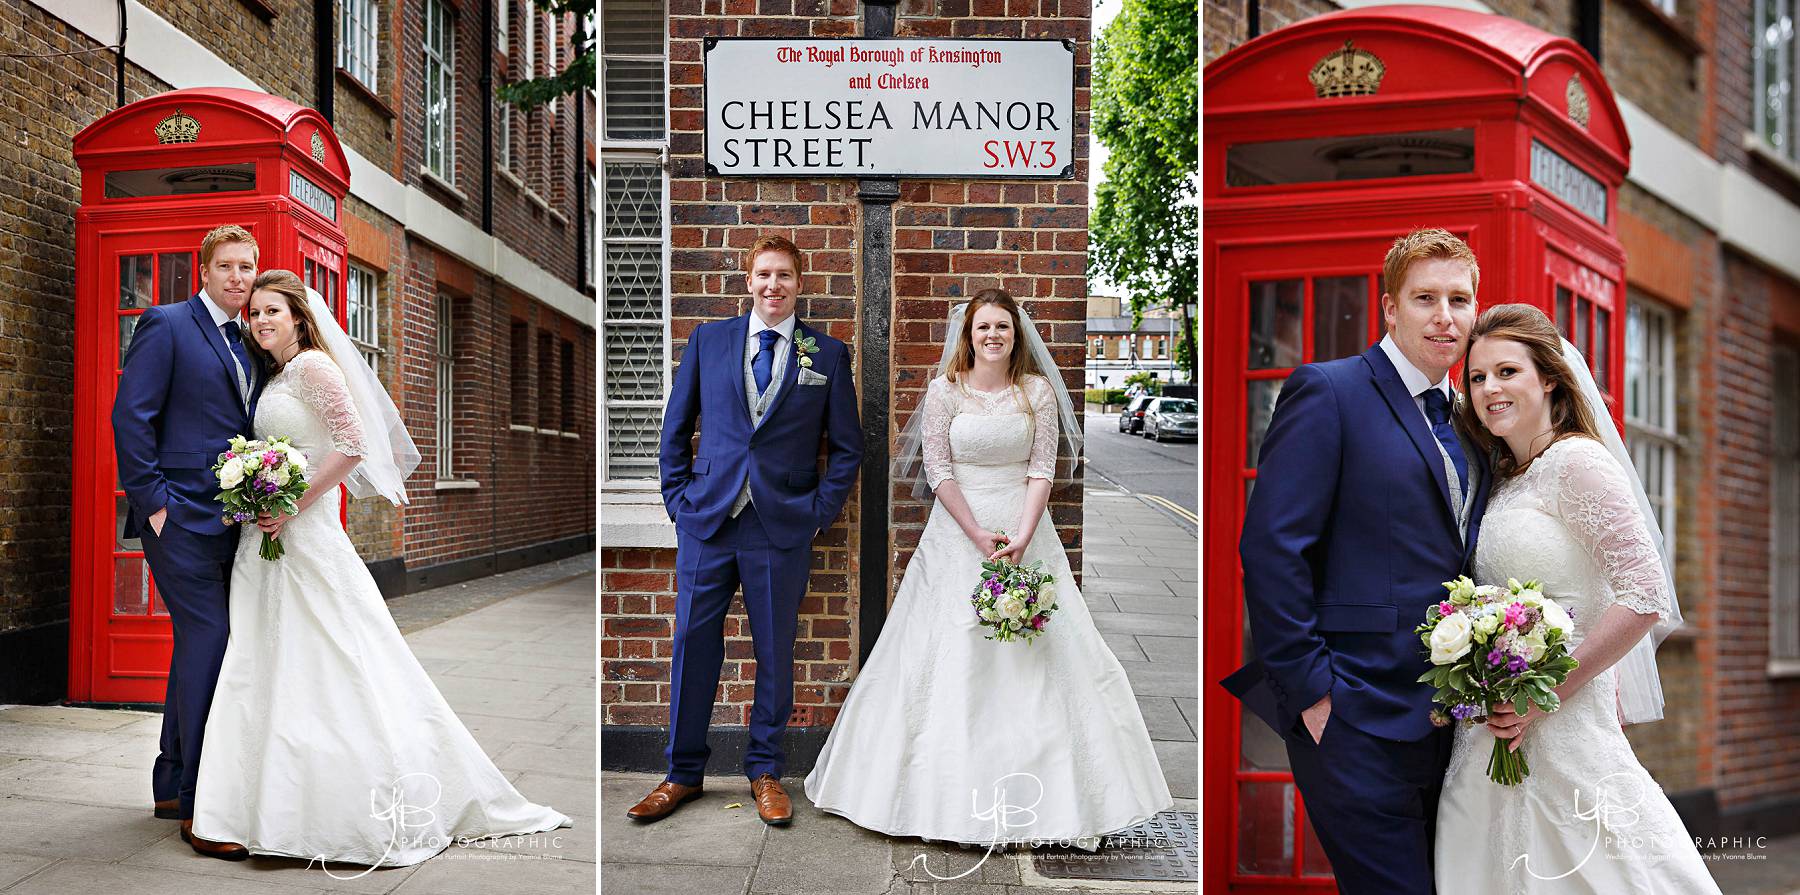 Wedding Portraits in Chelsea by register office expert YBPHOTOGRAPHIC